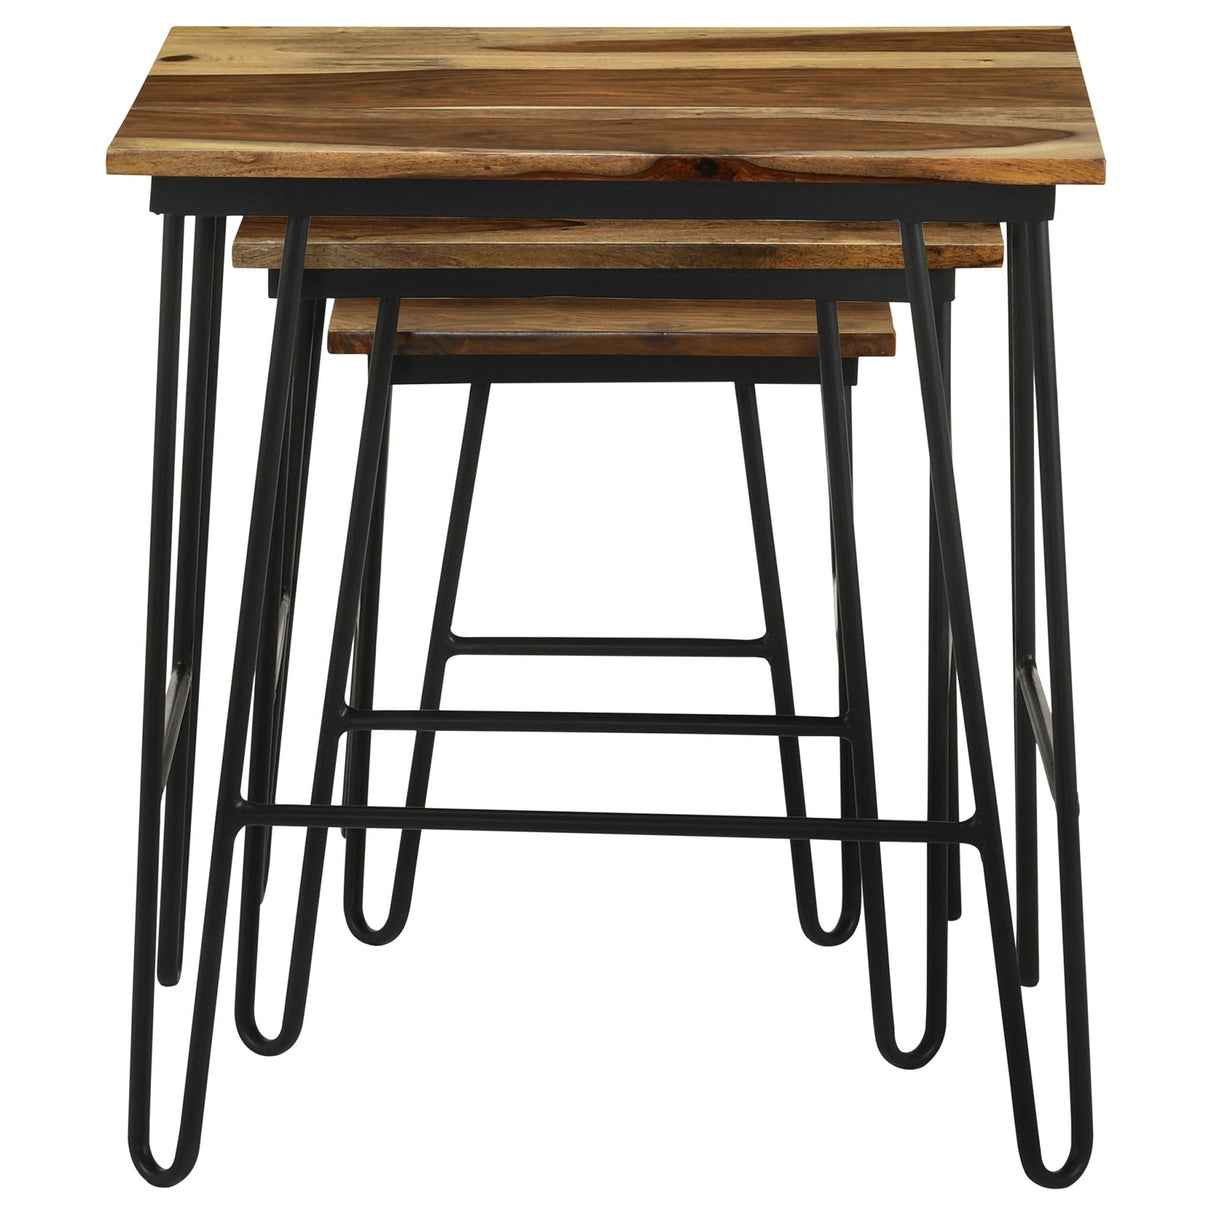 3 Pc Nesting Table - Nayeli 3-piece Nesting Table with Hairpin Legs Natural and Black